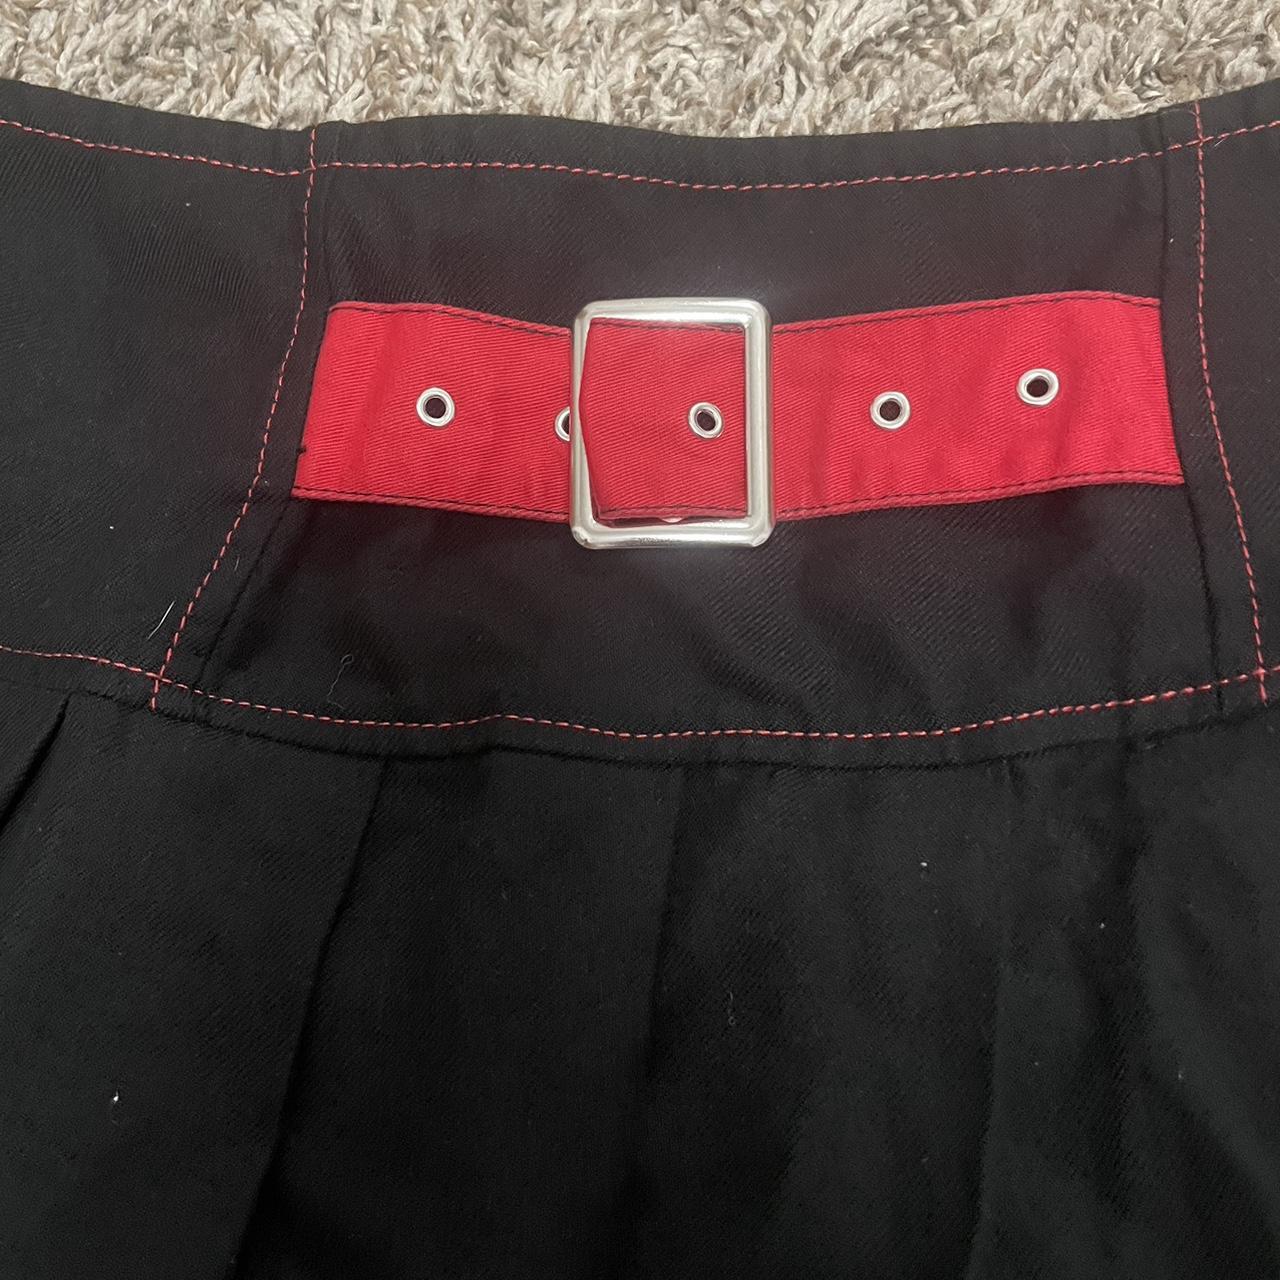 Royal Bones black and red pleated skirt with buckle... - Depop